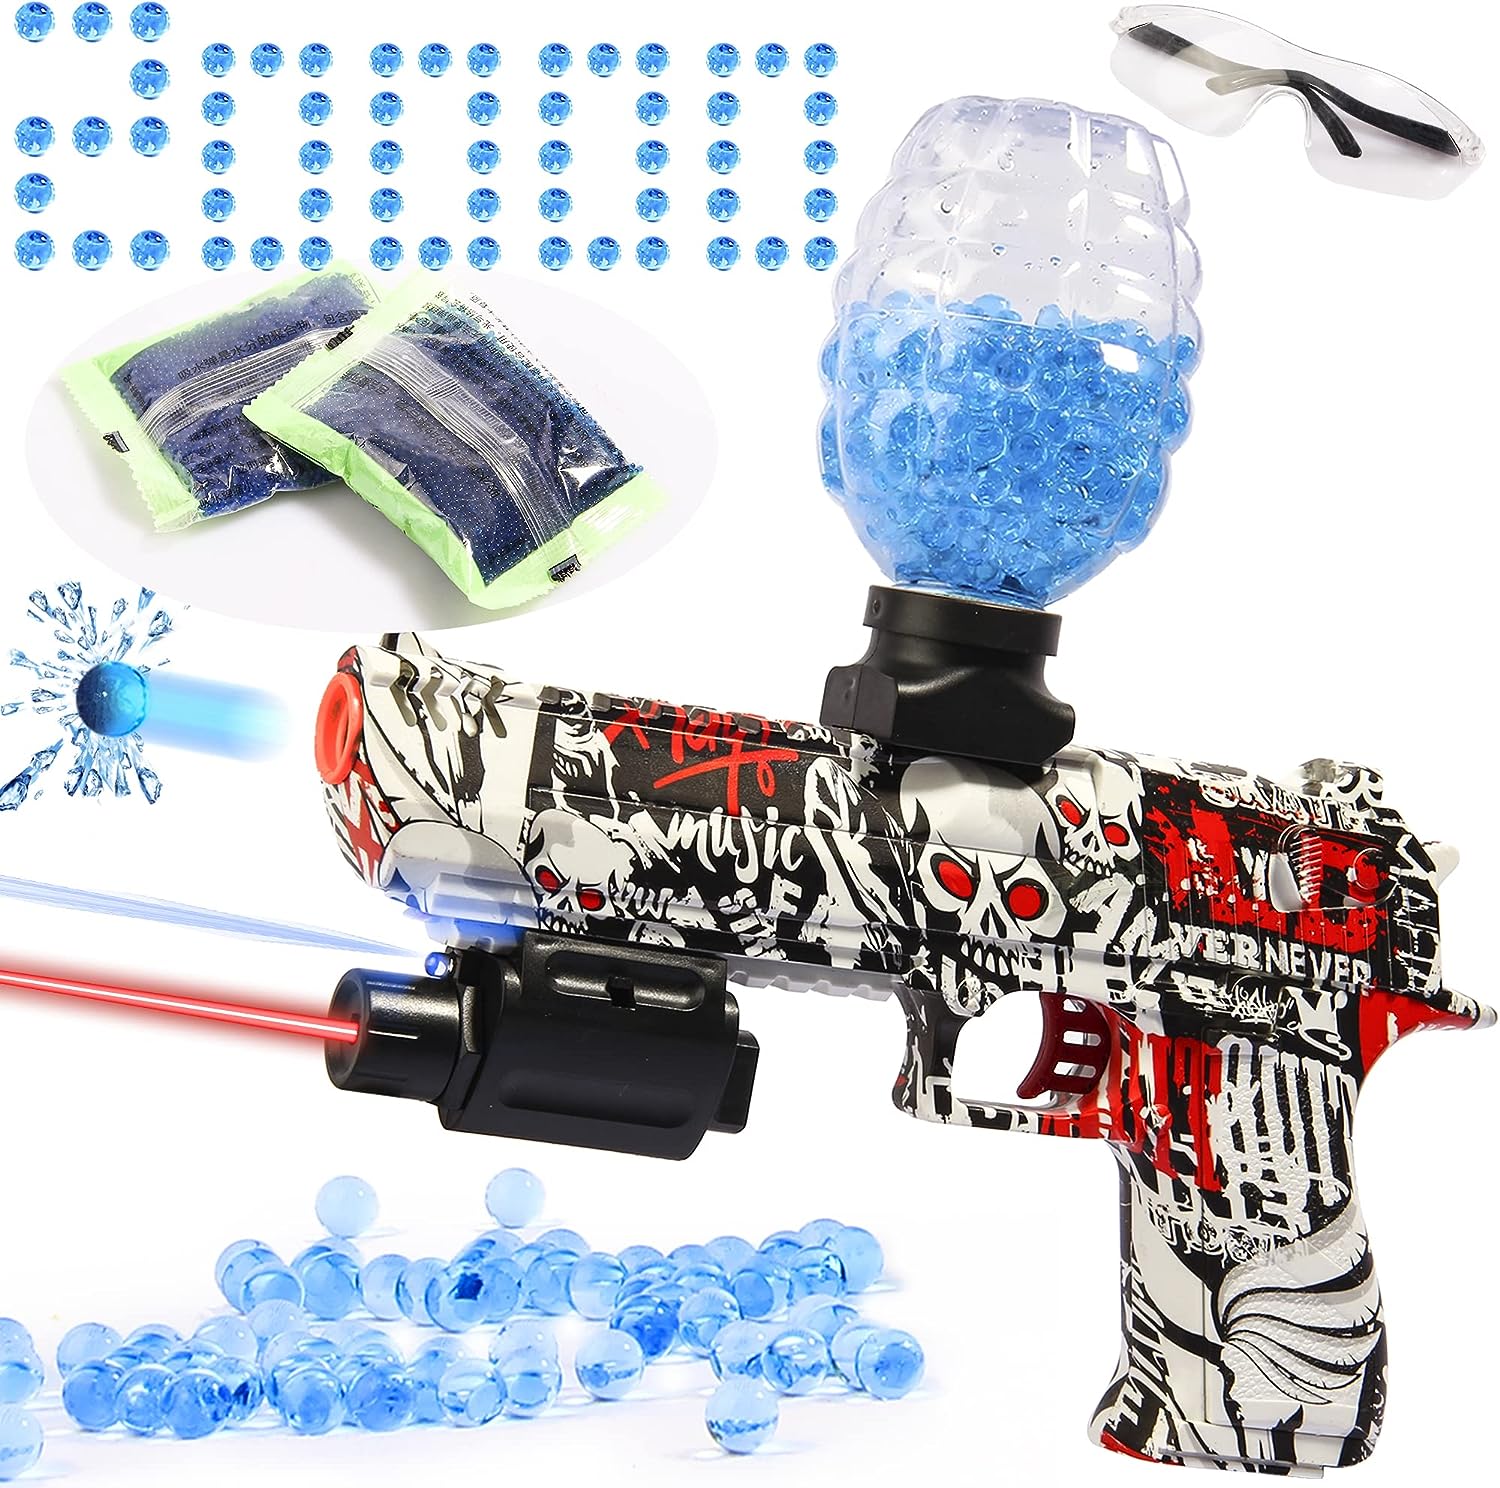 An Eco-Friendly Splatter Ball Blaster Automatic orbeez gun, featuring blue water beads and goggles.